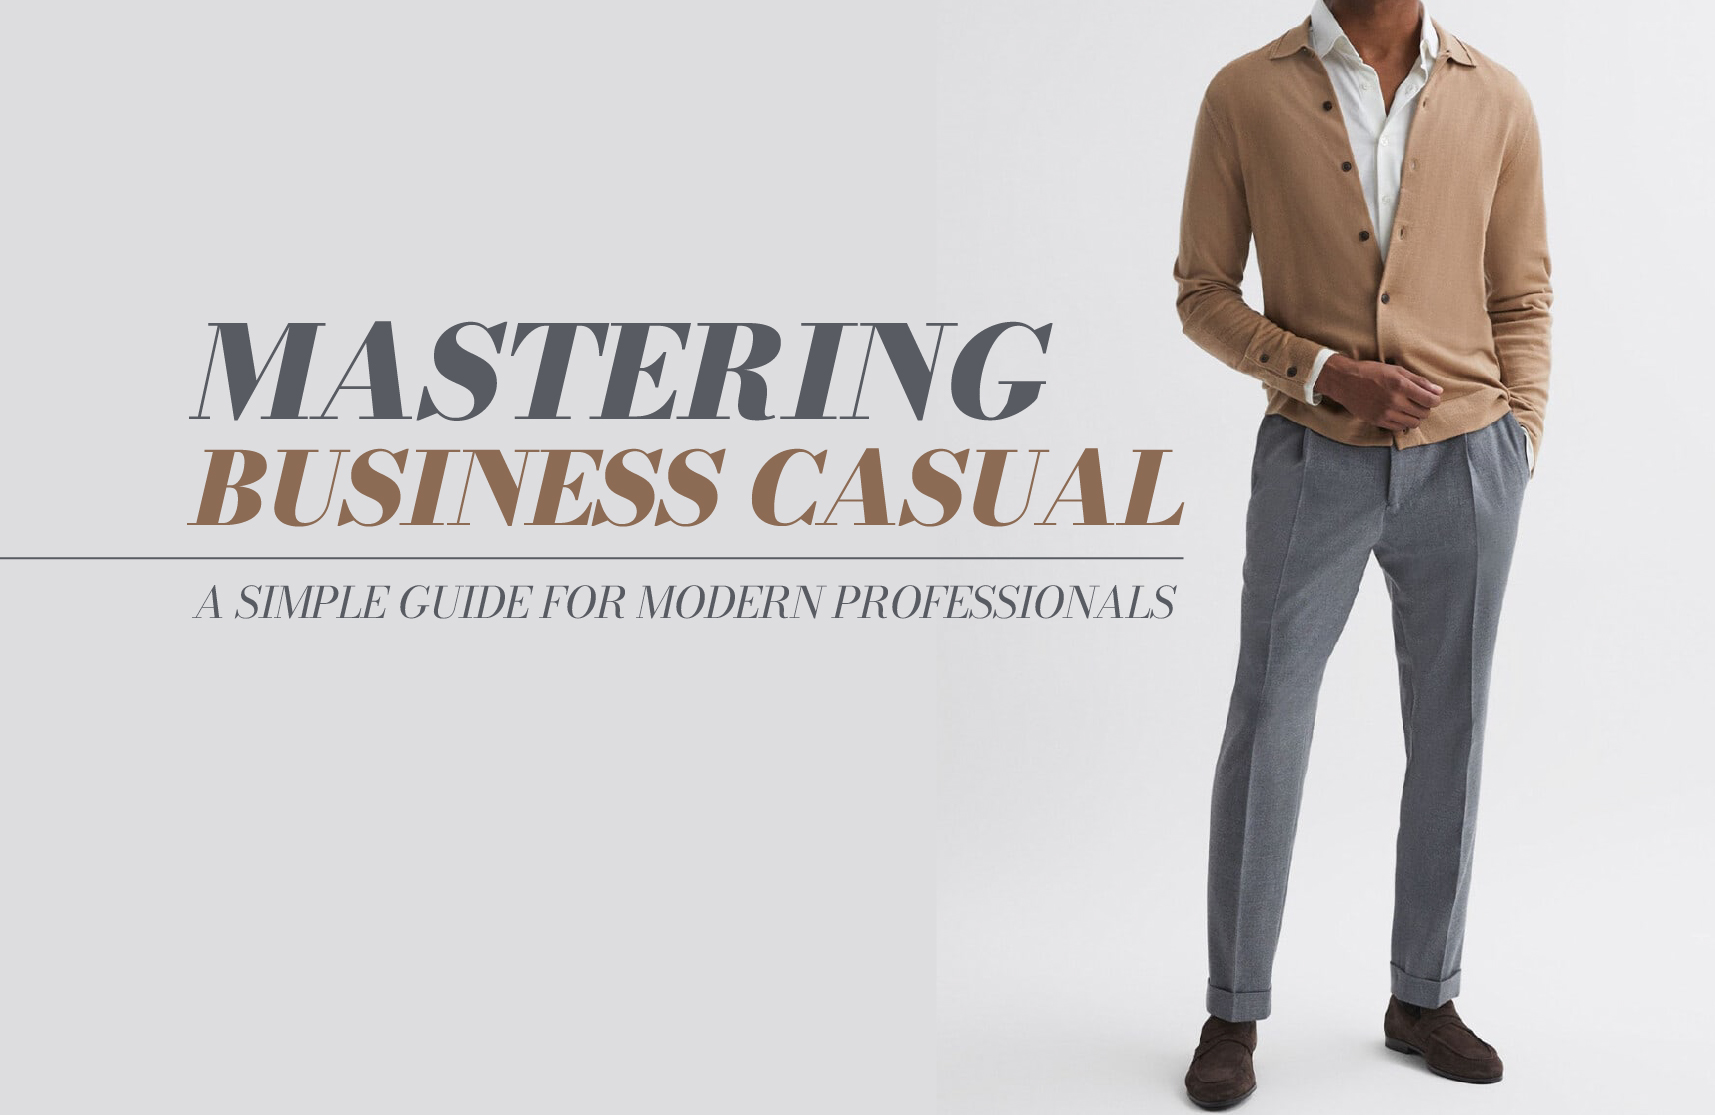 Mastering Business Casual – A Simple Guide for Modern Professionals